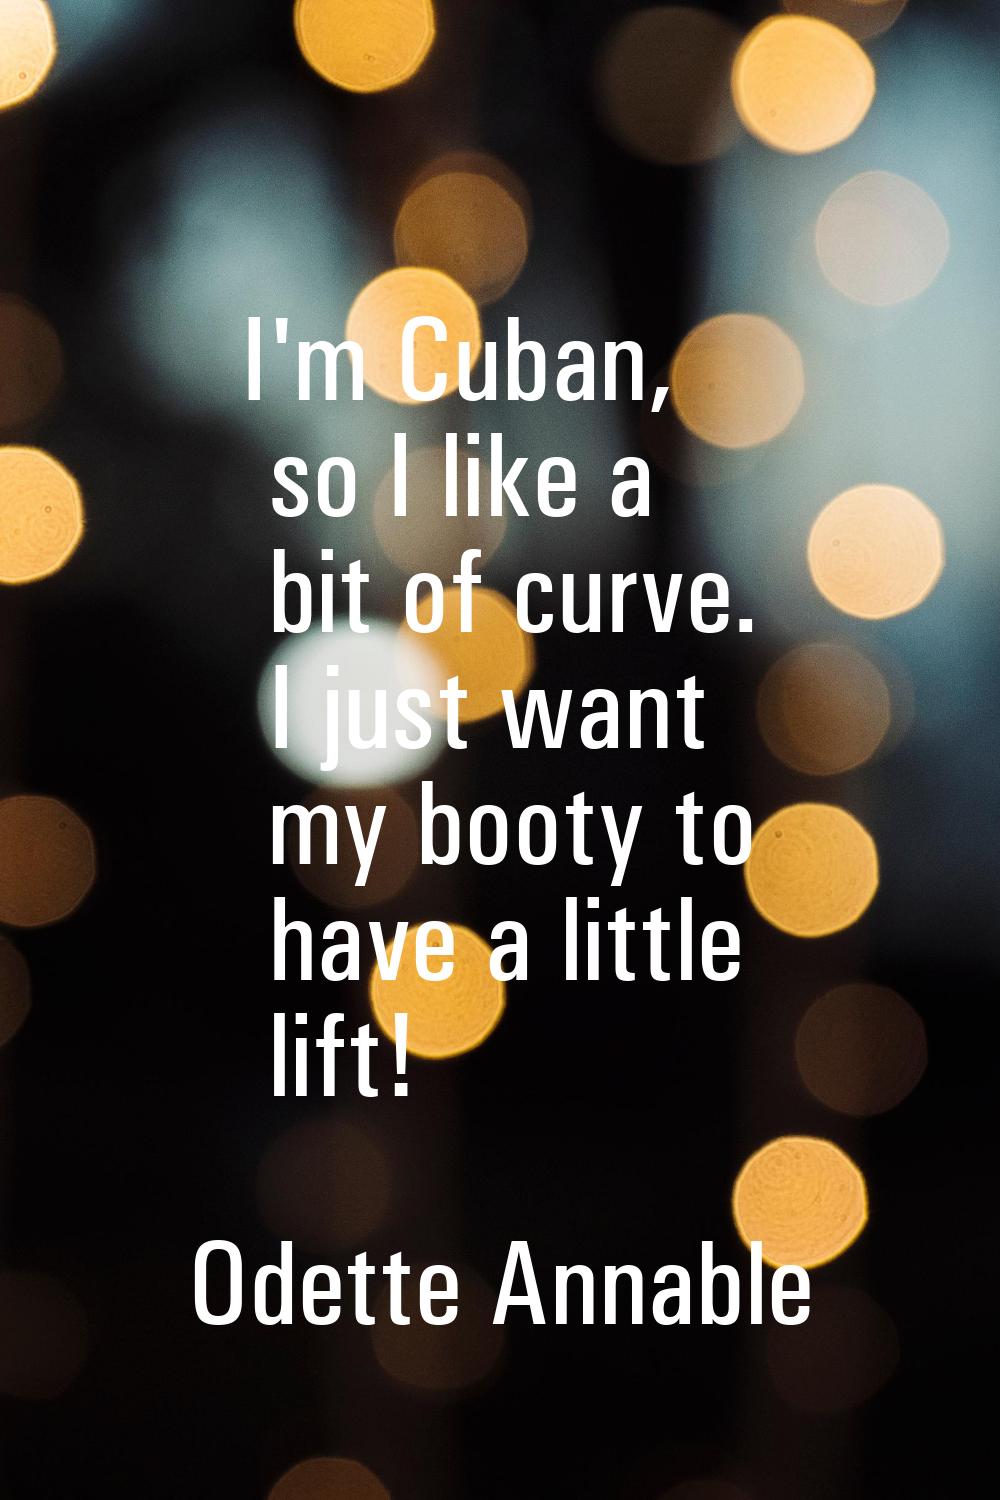 I'm Cuban, so I like a bit of curve. I just want my booty to have a little lift!